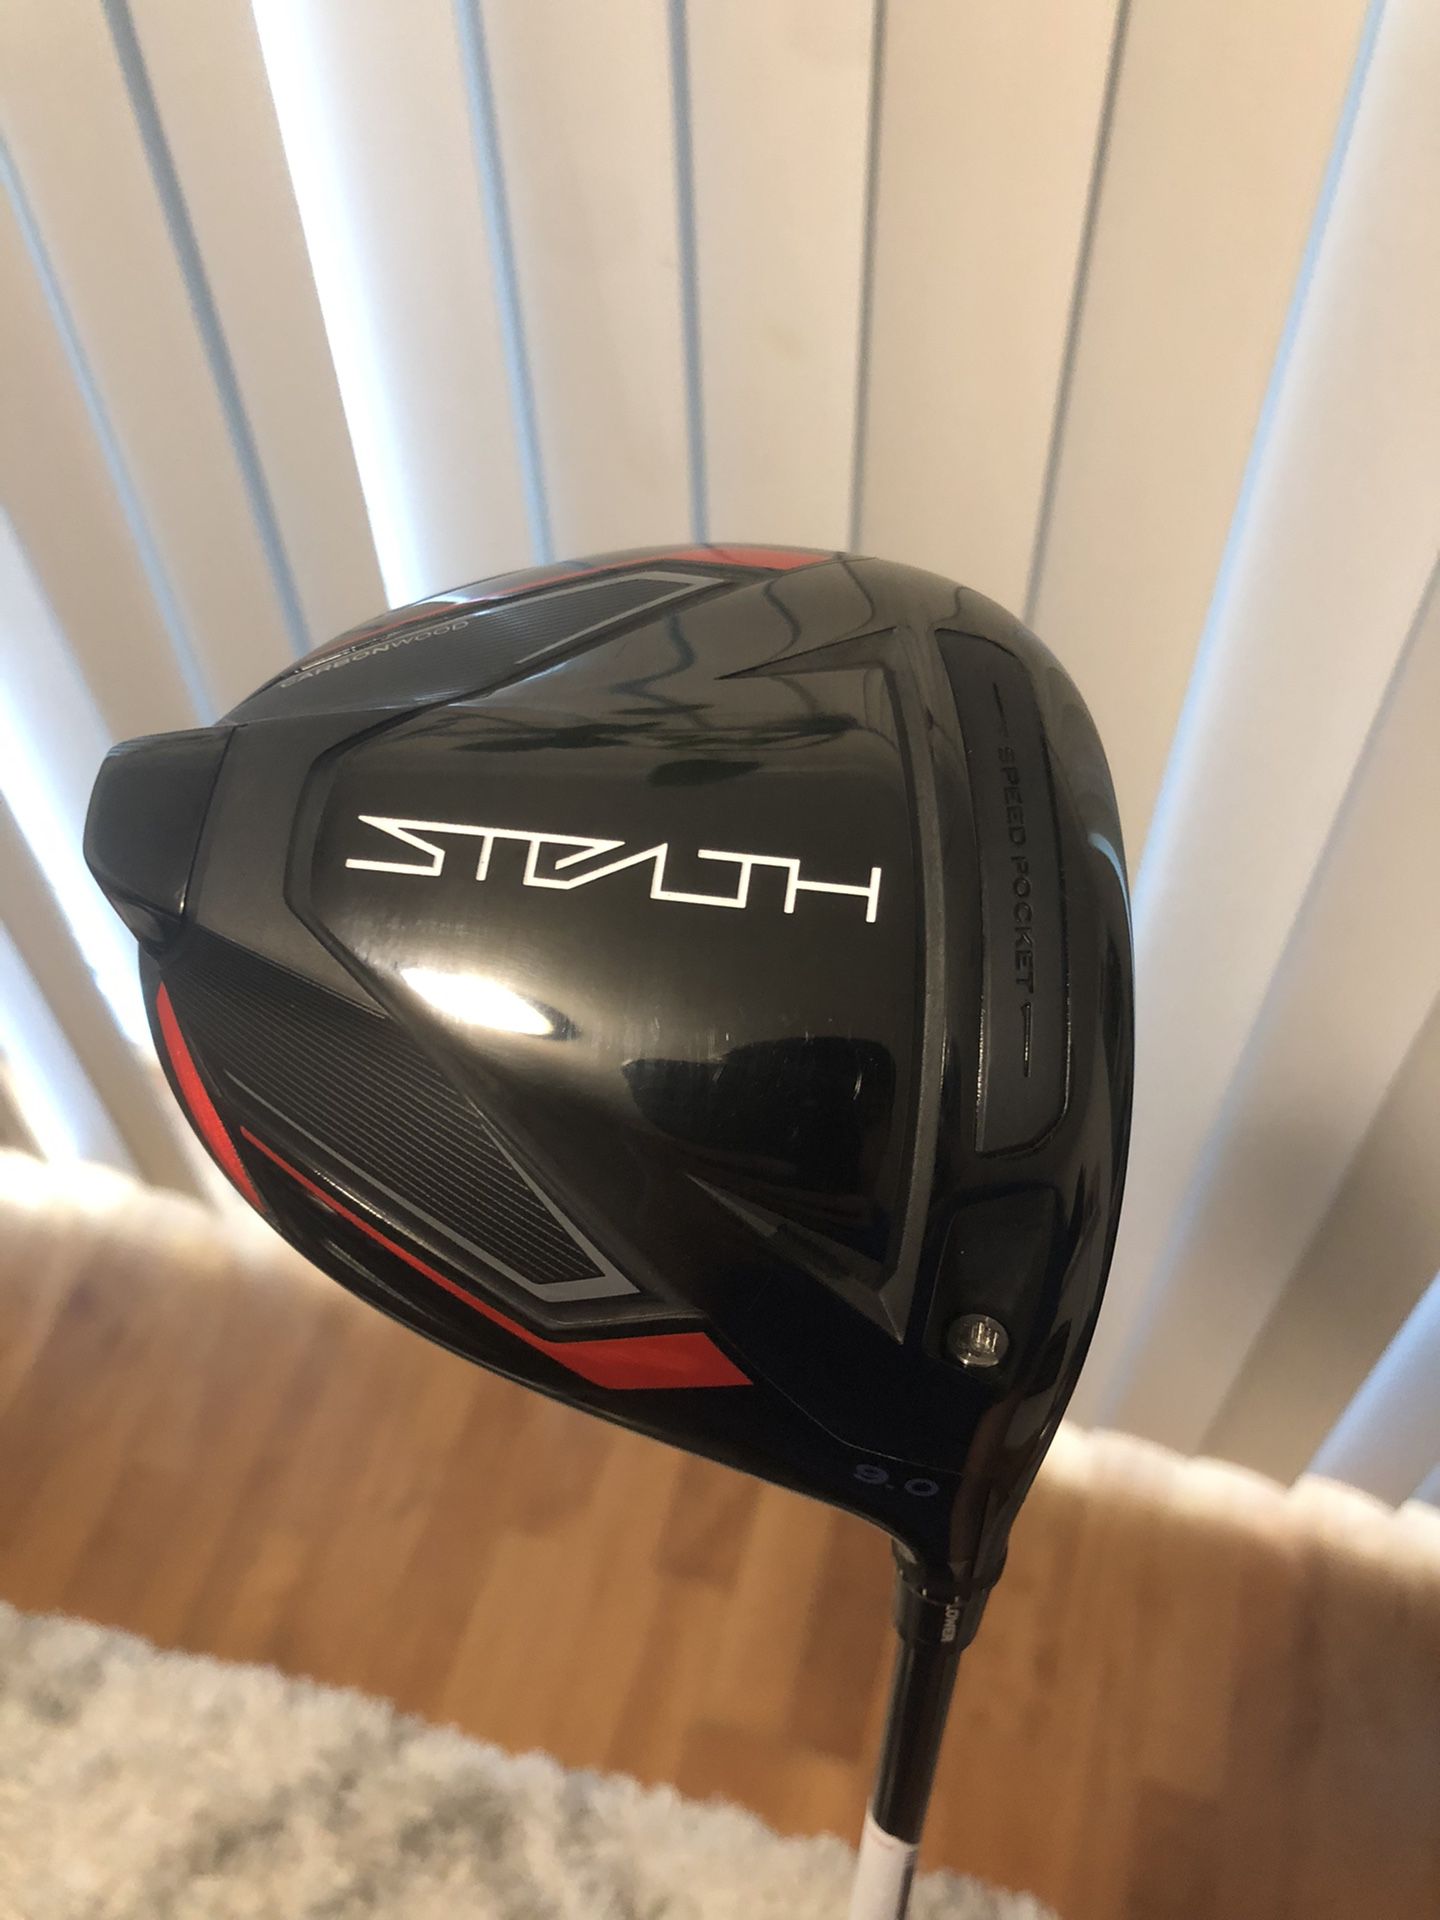 Taylormade Stealth Driver 9* Stiff -Hit Only 5 Times!!